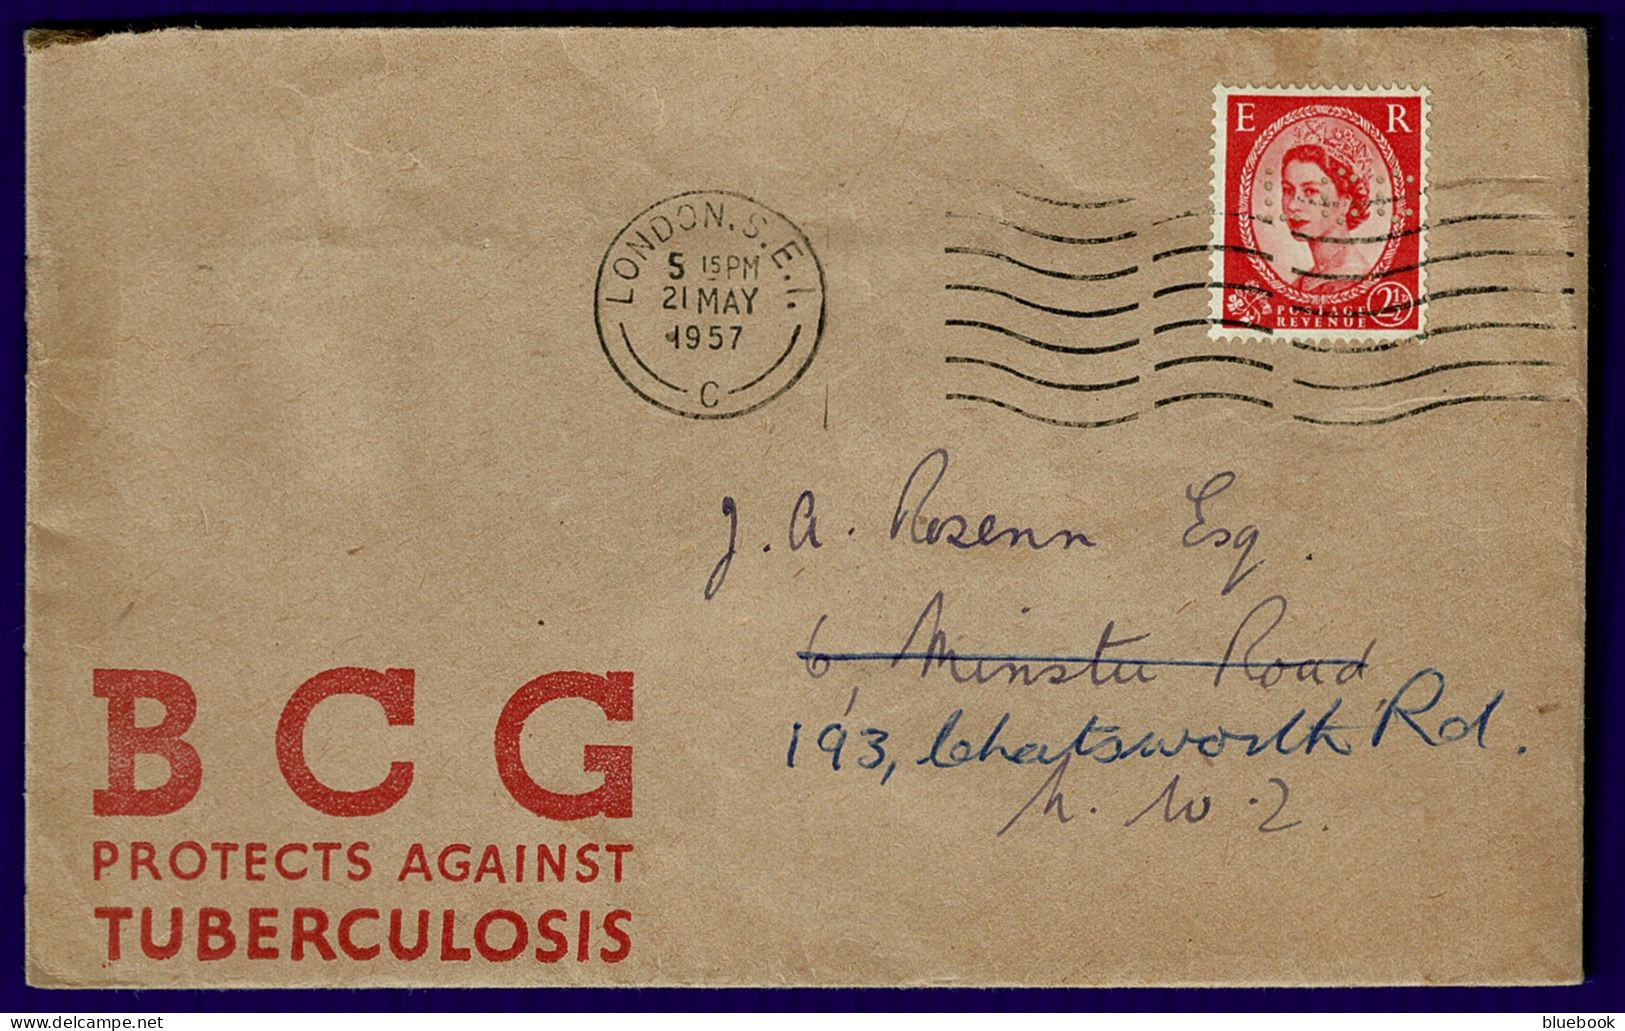 Ref 1648 - GB - 1957 Perfin Cover (LCC) With BCG Protects Against TB Cachet & Contents - Perfins